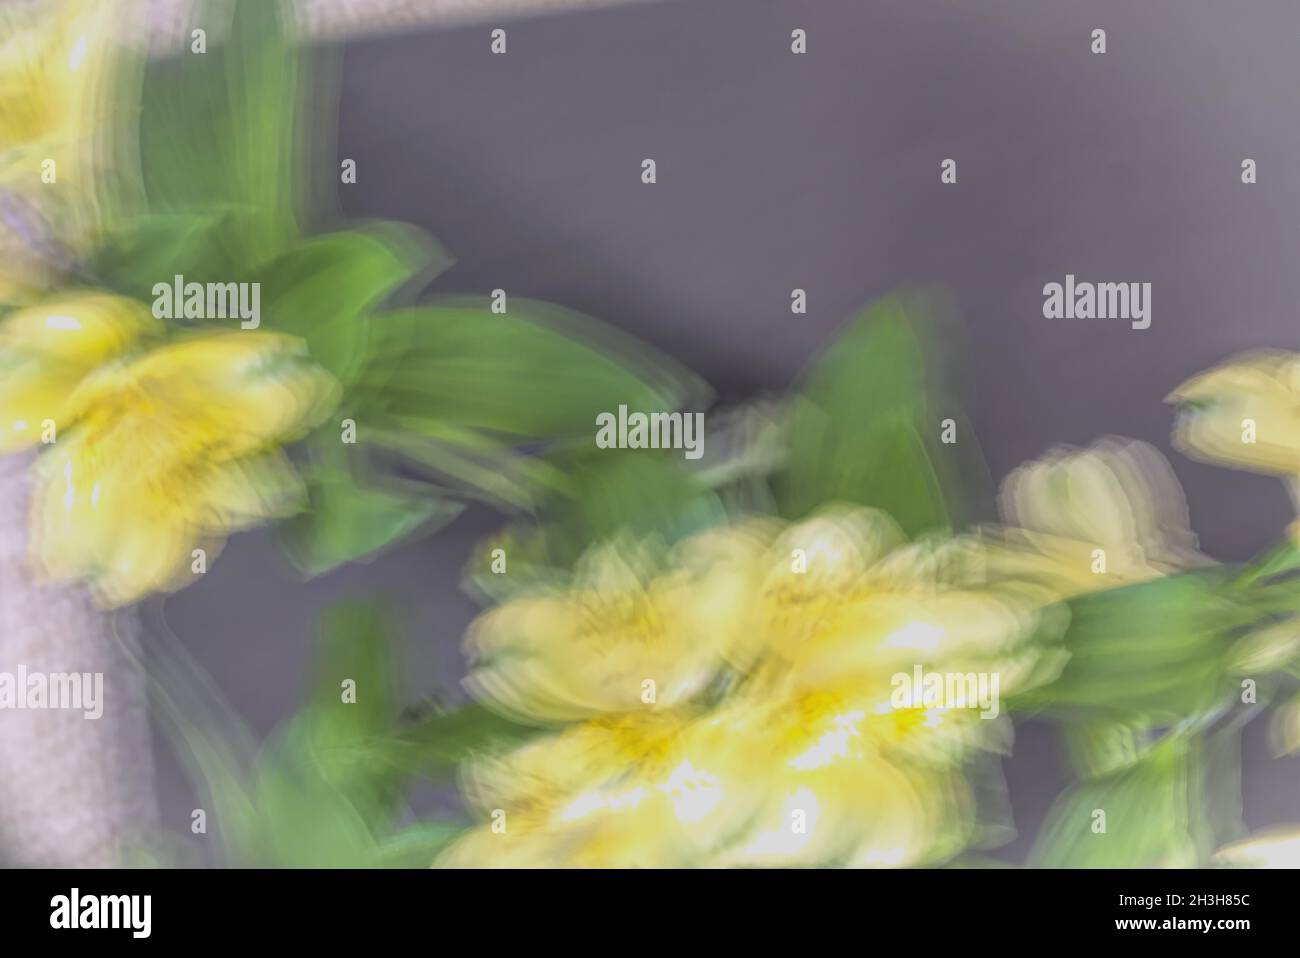 On the edge.  ICM blurred yellow alstroemeria flowers cover the left and lower side of frame leaving darkened area for text. Stock Photo